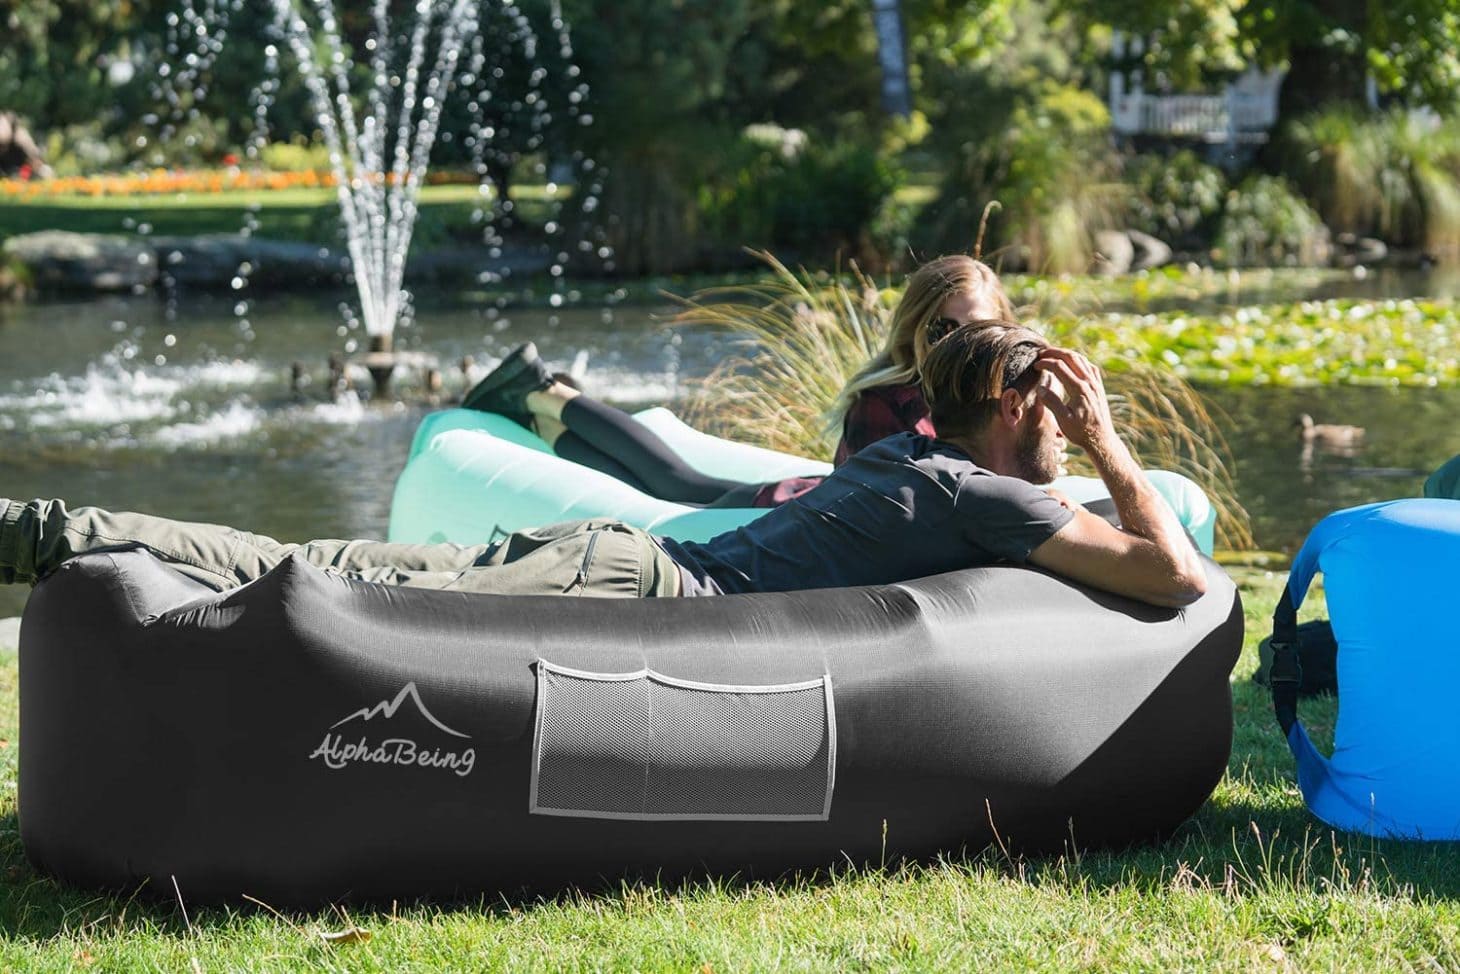 Friends lounging on inflatable lounger outside